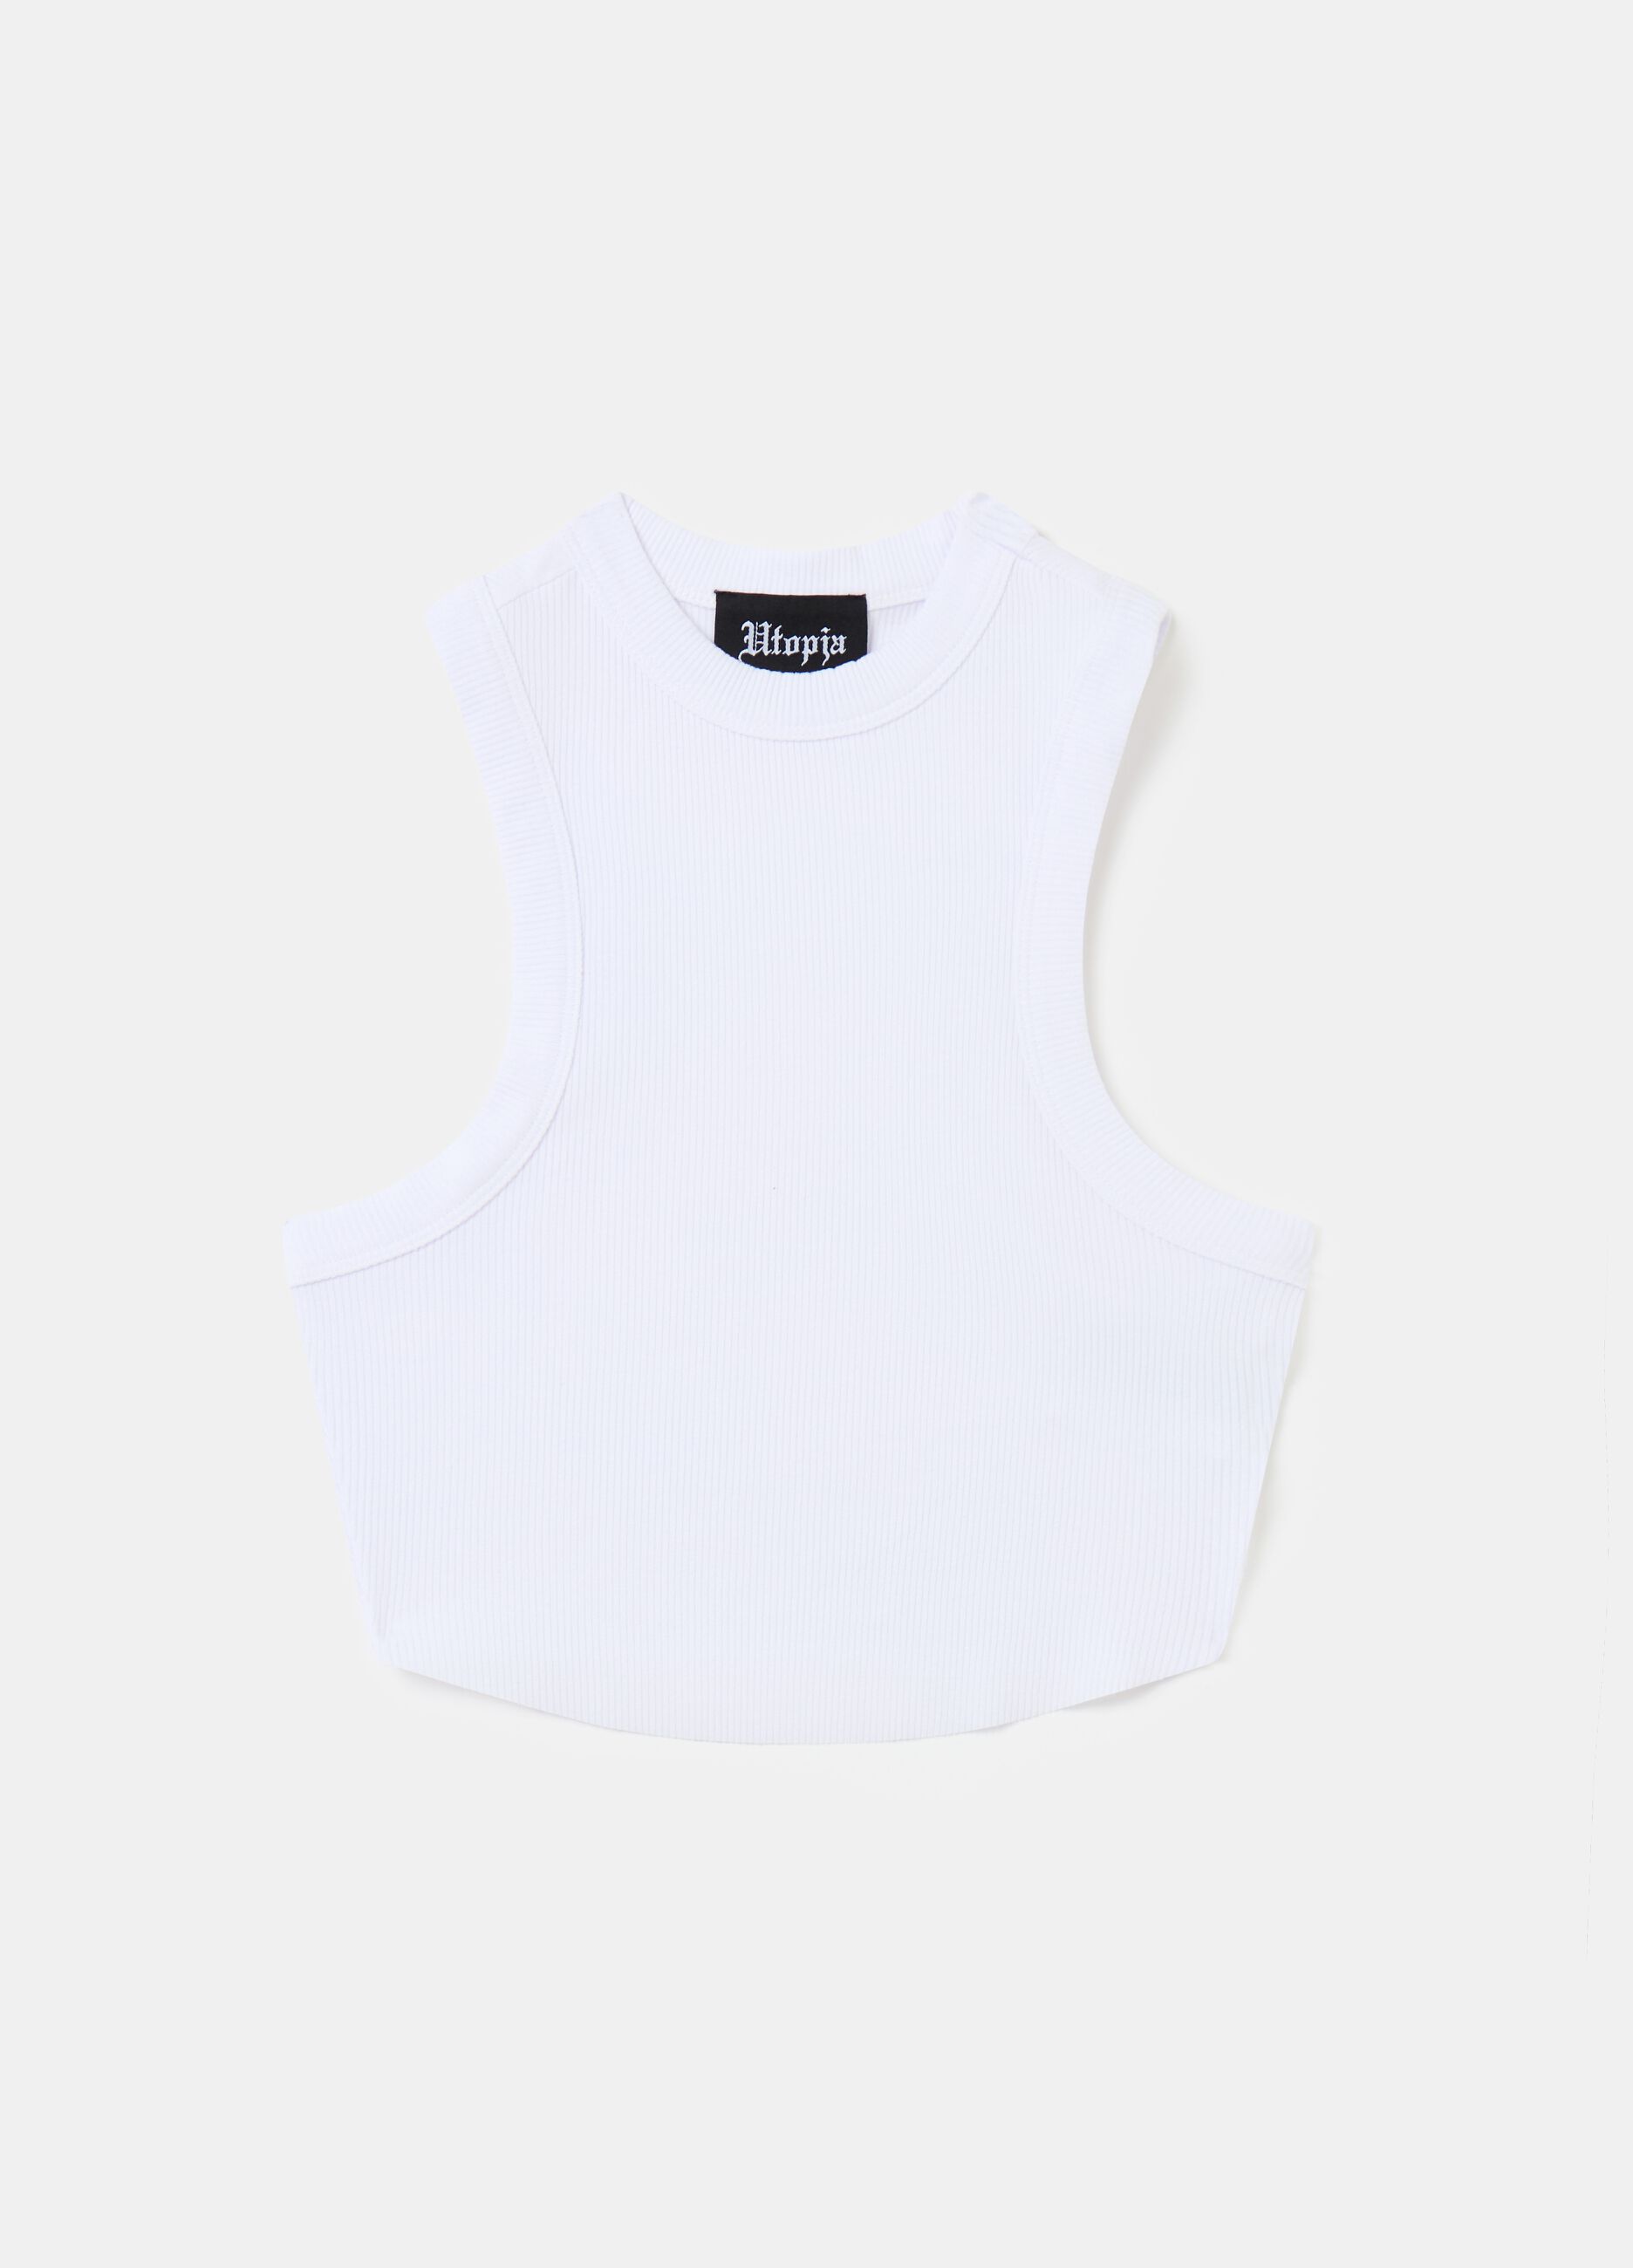 Rounded Crop Tank White